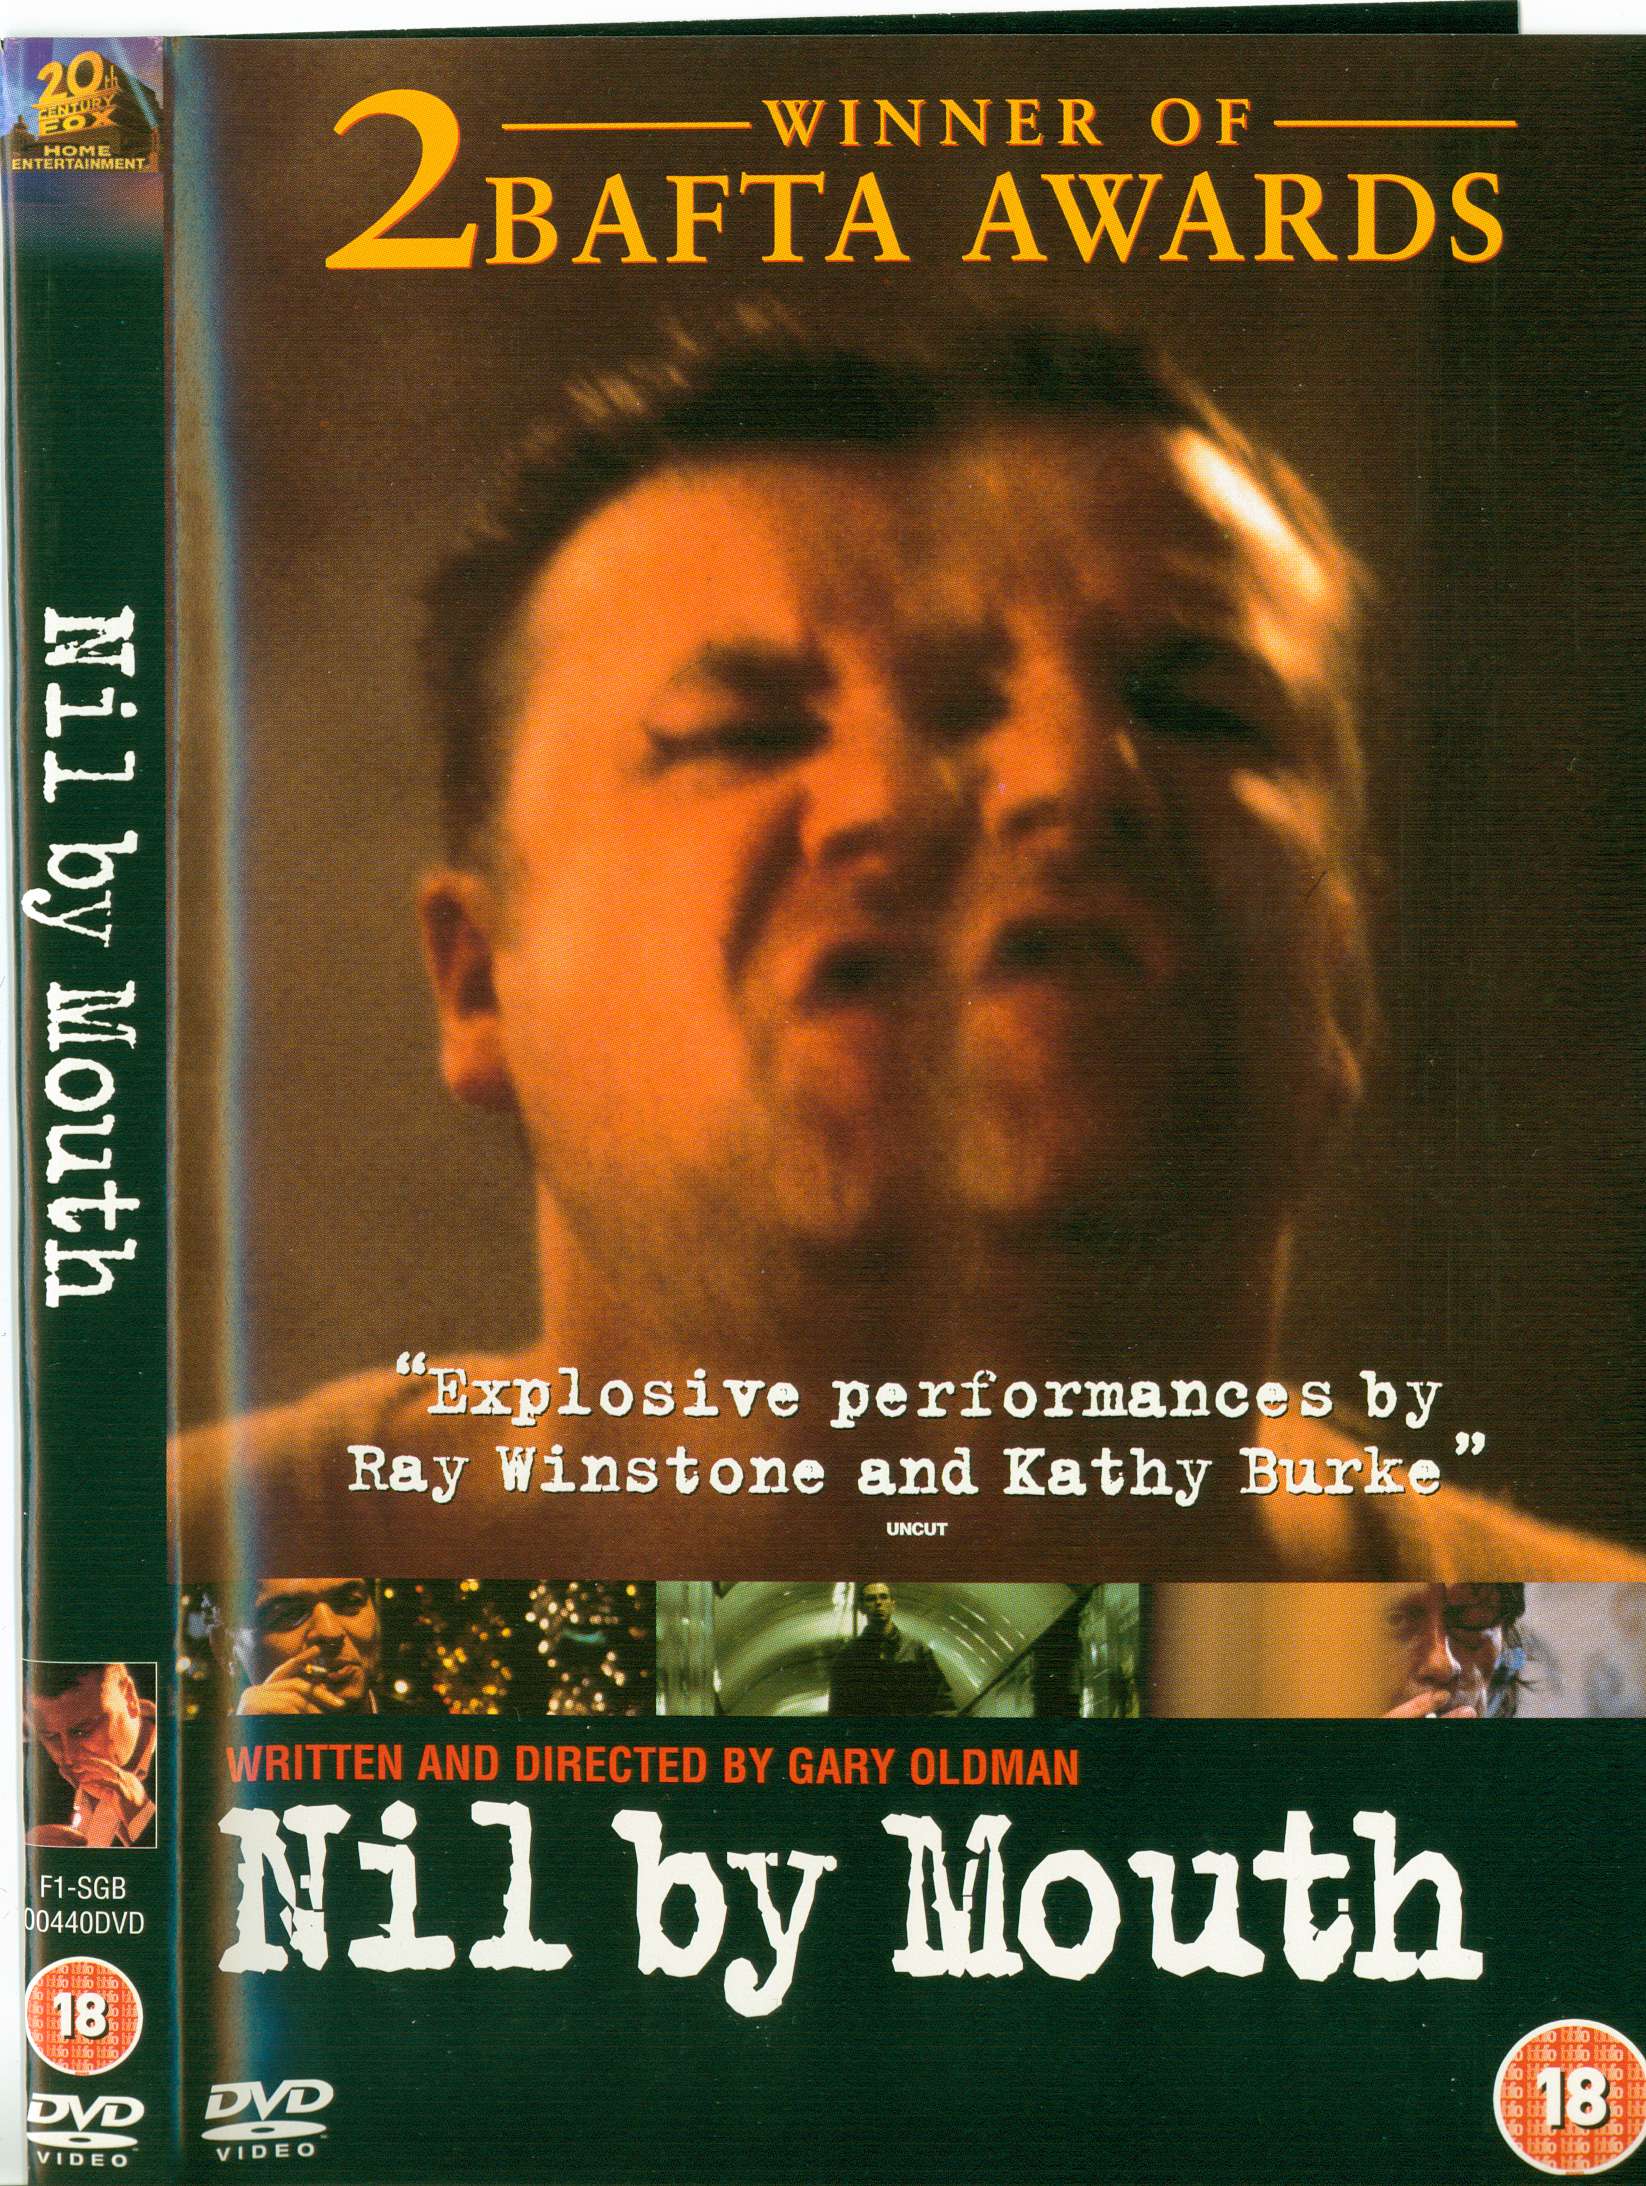 'Nil by Mouth' fantastic film, more people have asked me about working on this film than any other, shot in south london this one was hard. production design by Michael Carlin.